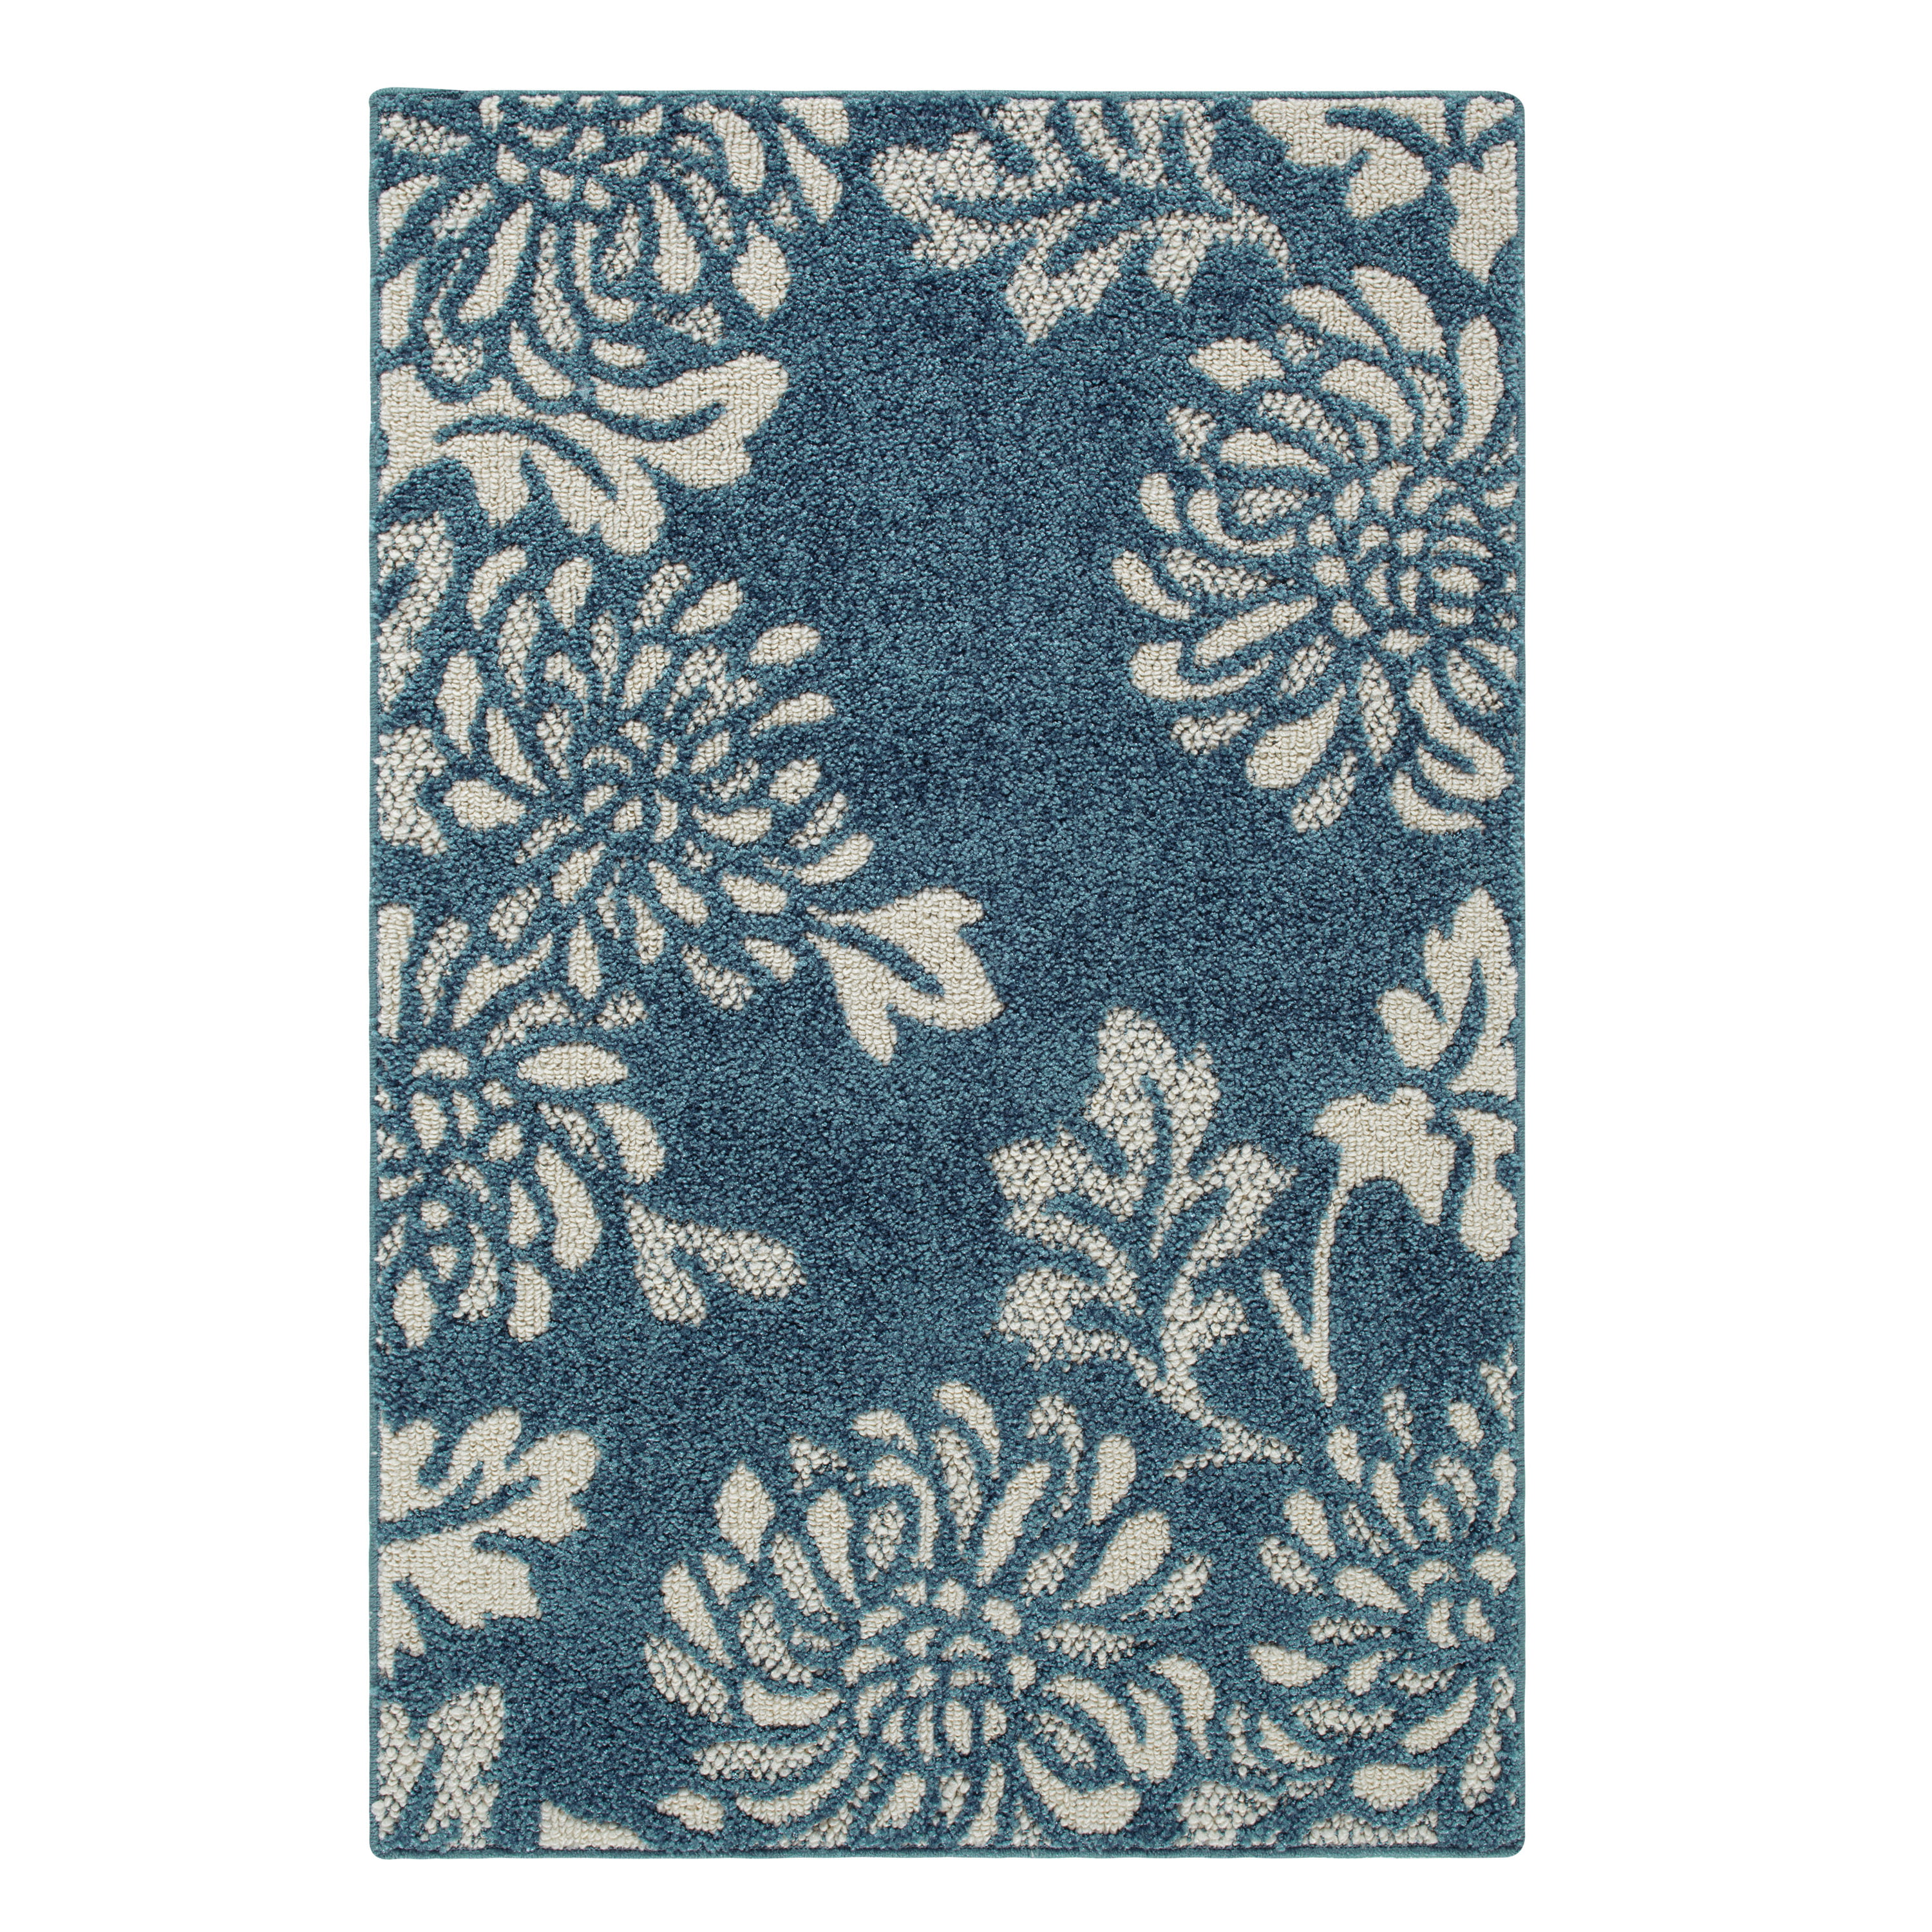 New Better Homes And Gardens Teal Mums Area Runner Rug 20 X 60